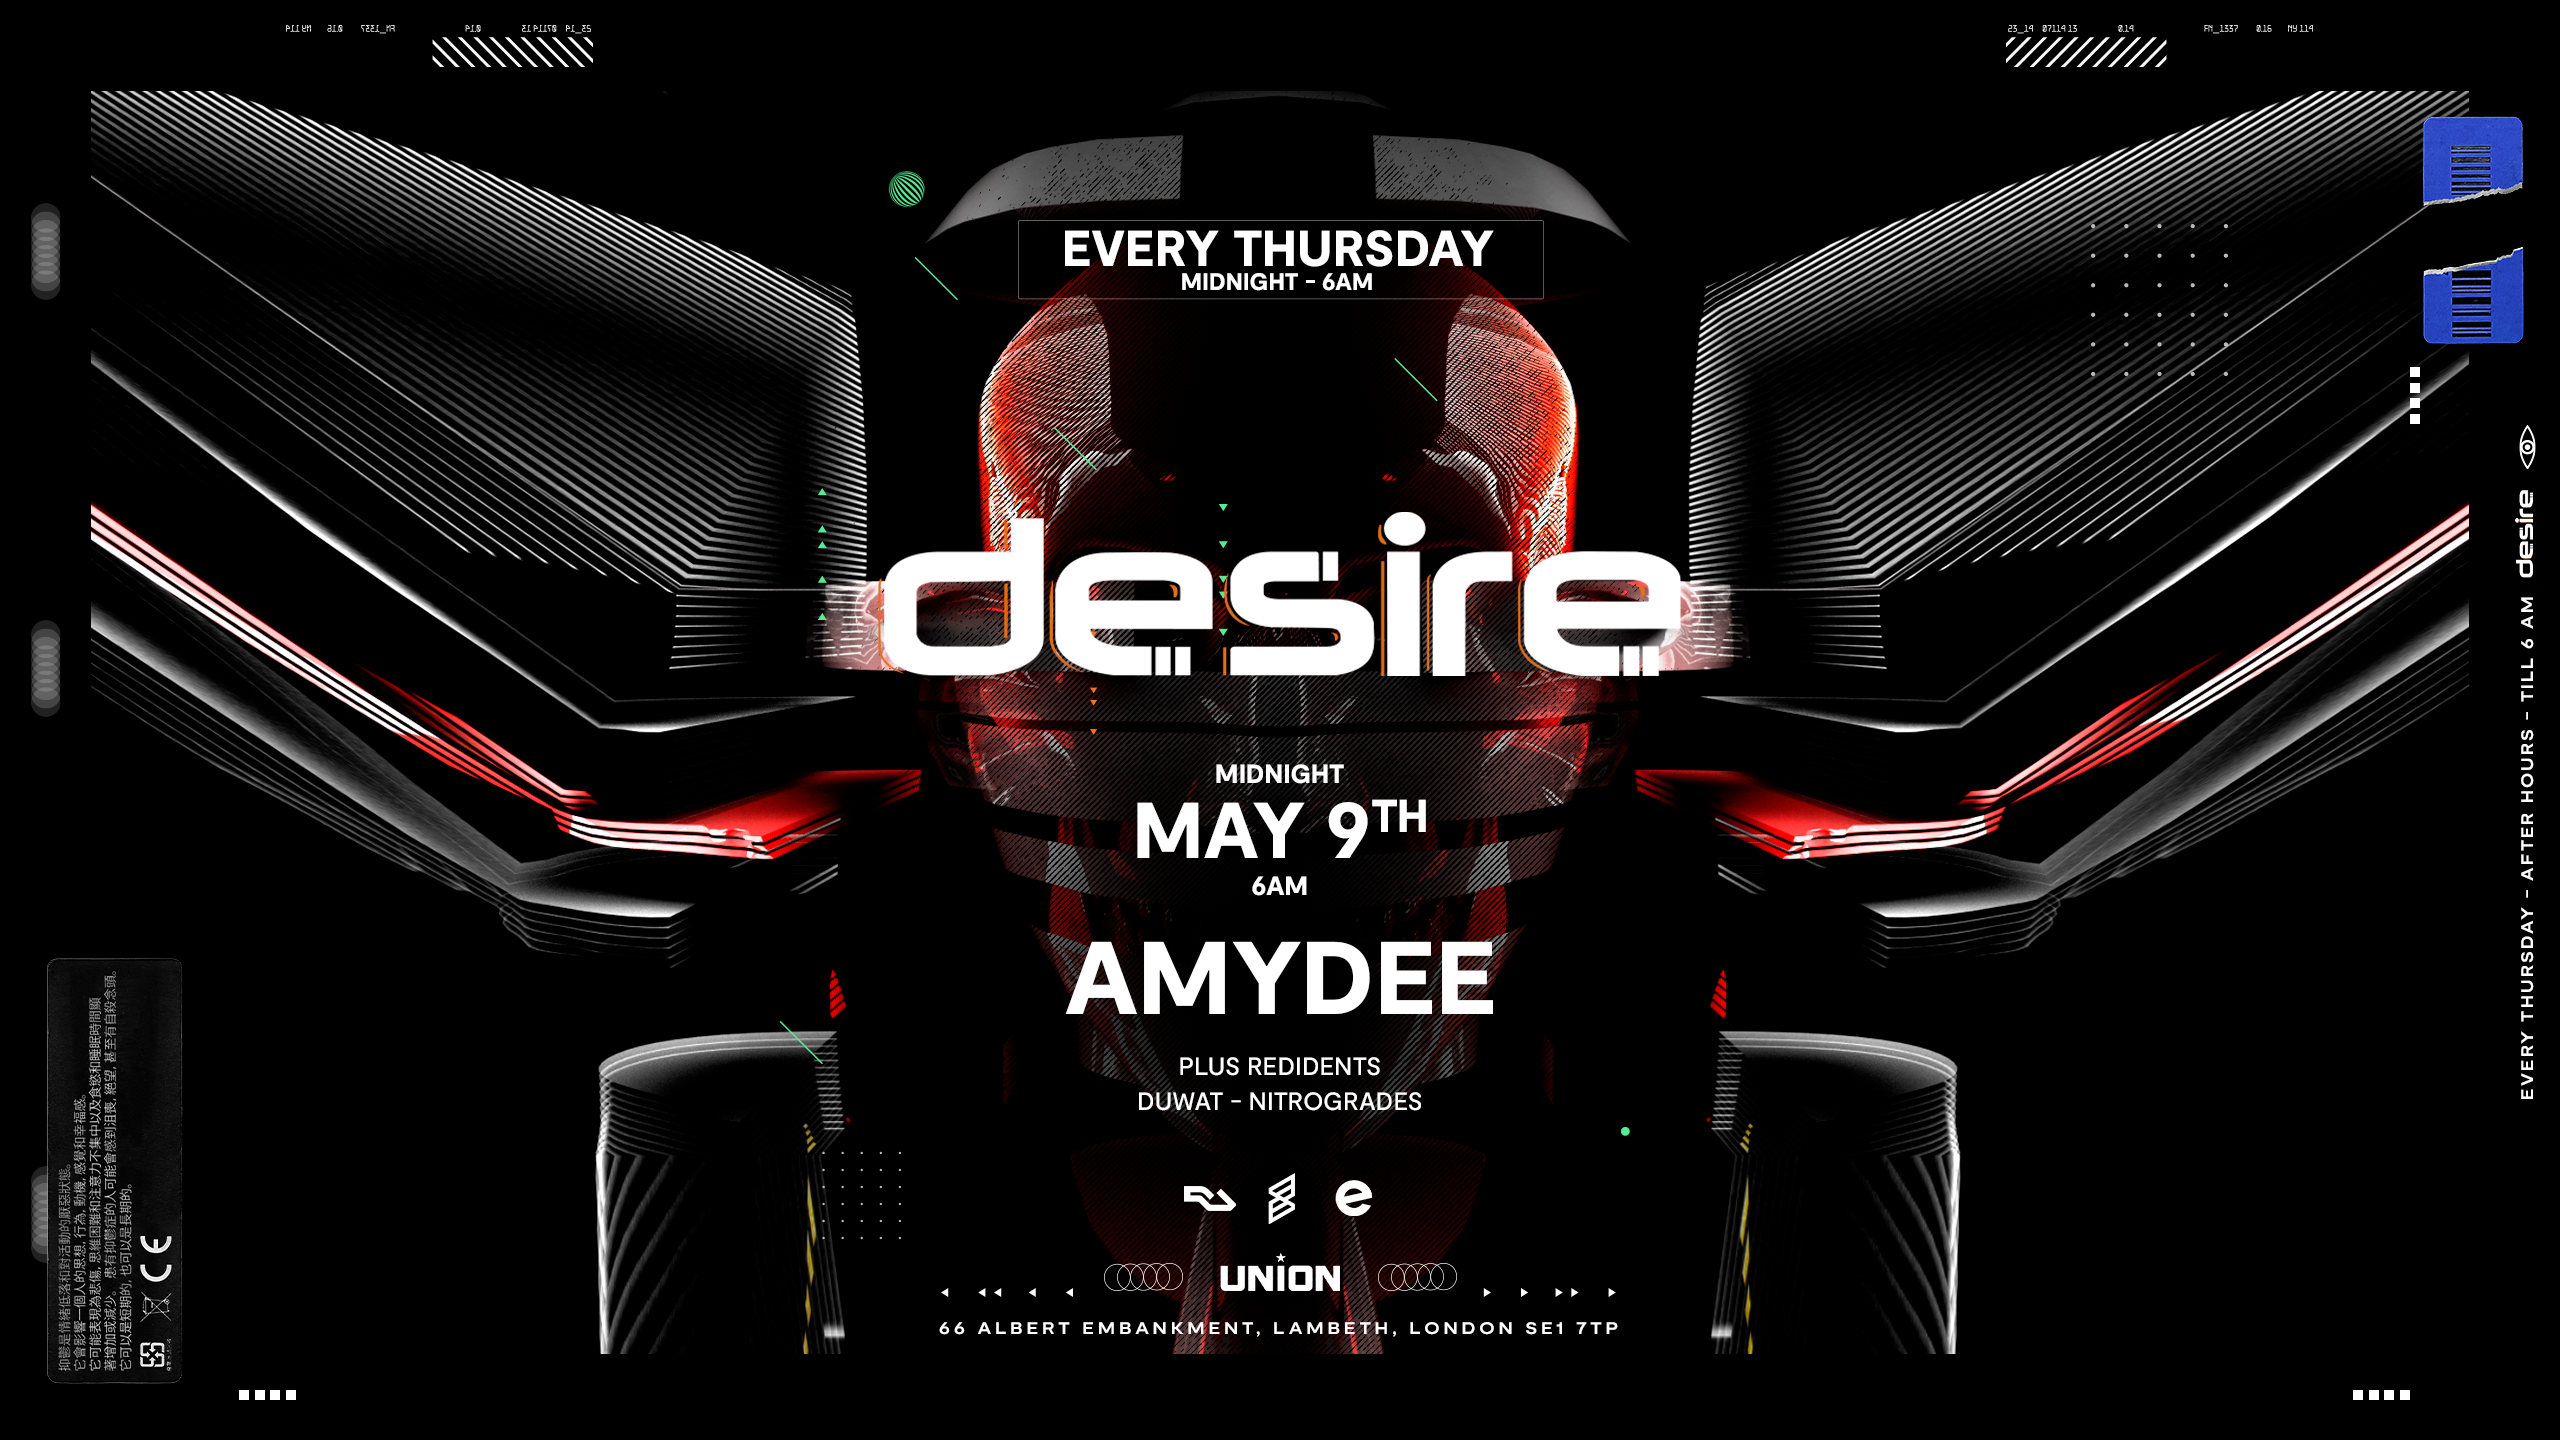 Desire (Your Weekly Thursday After Party) - フライヤー表